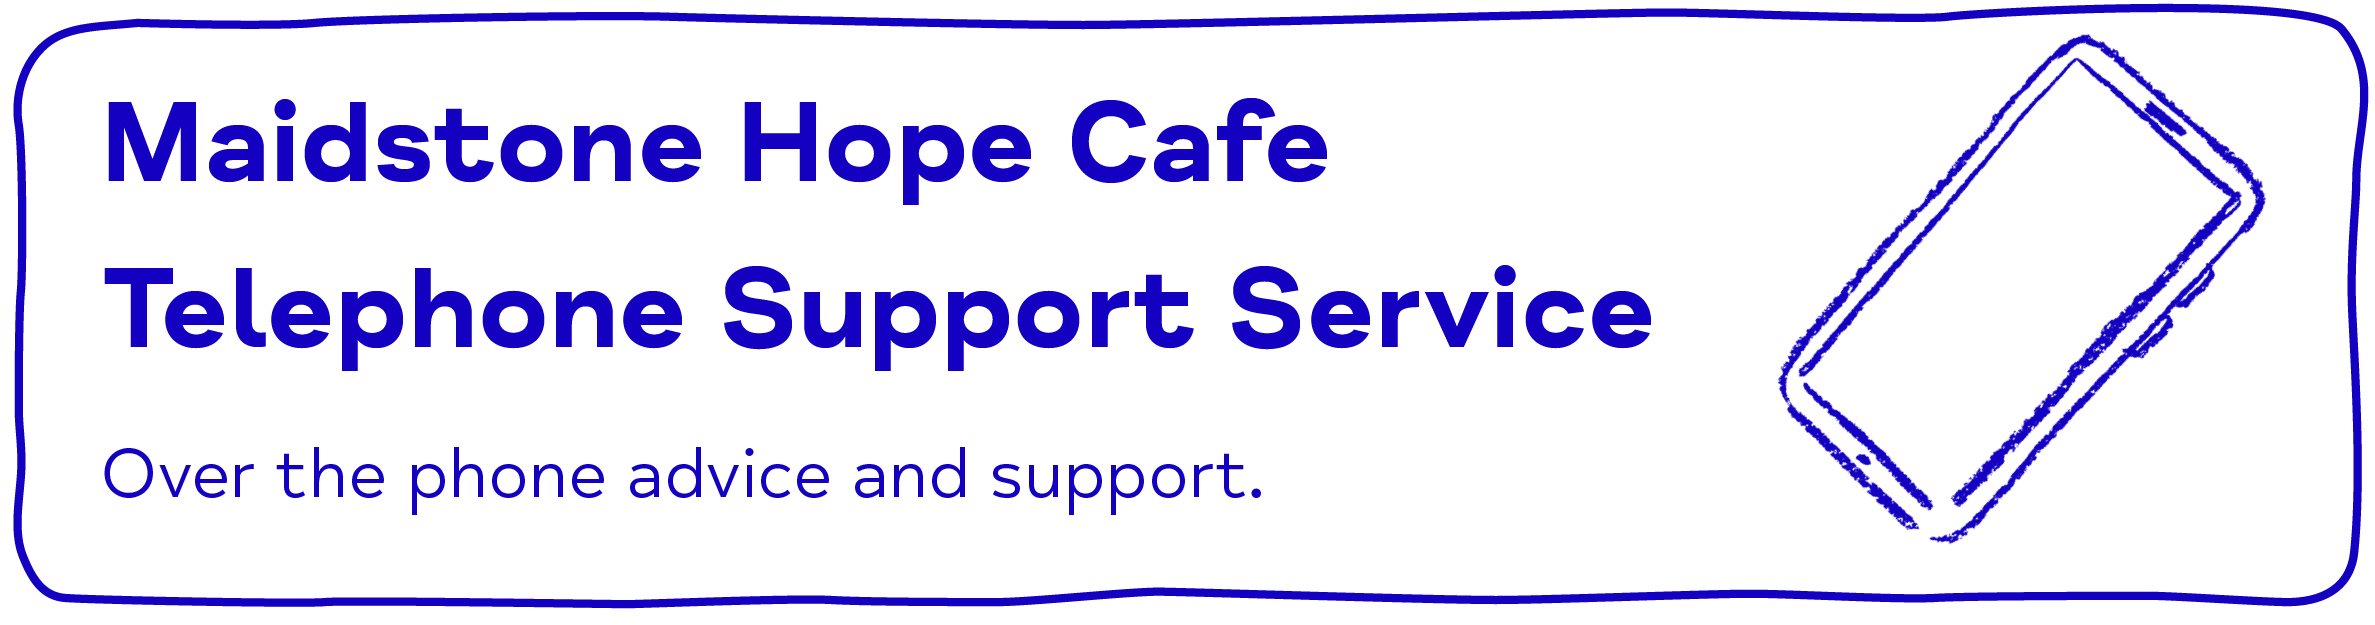 Maidstone Hope Cafe Telephone Support Service - Over the phone advice and support.